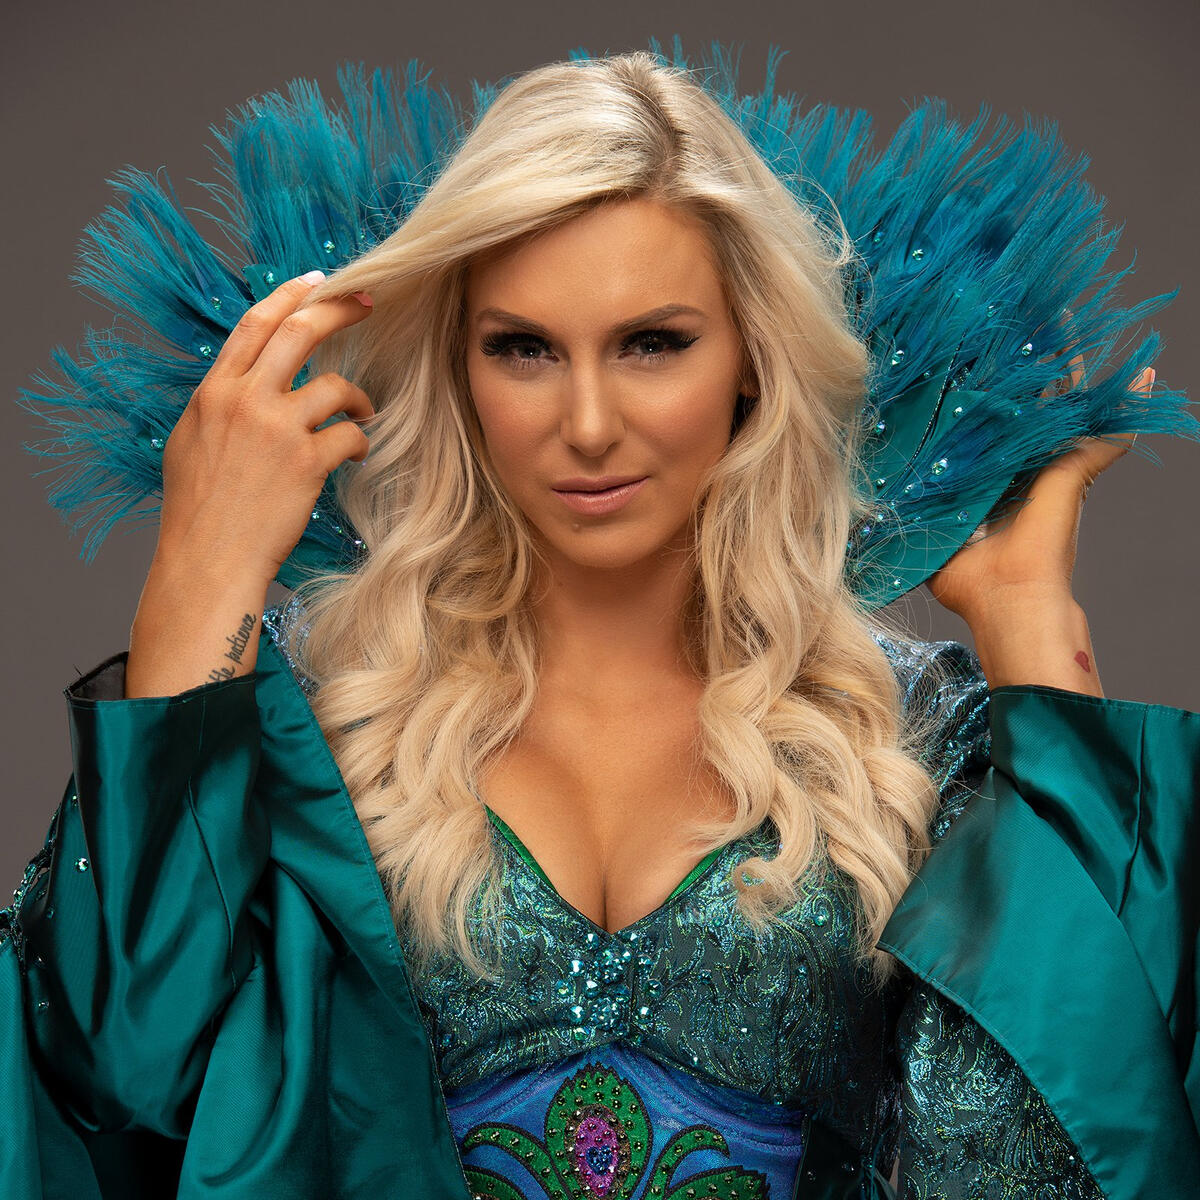 Charlotte flair photo gallery